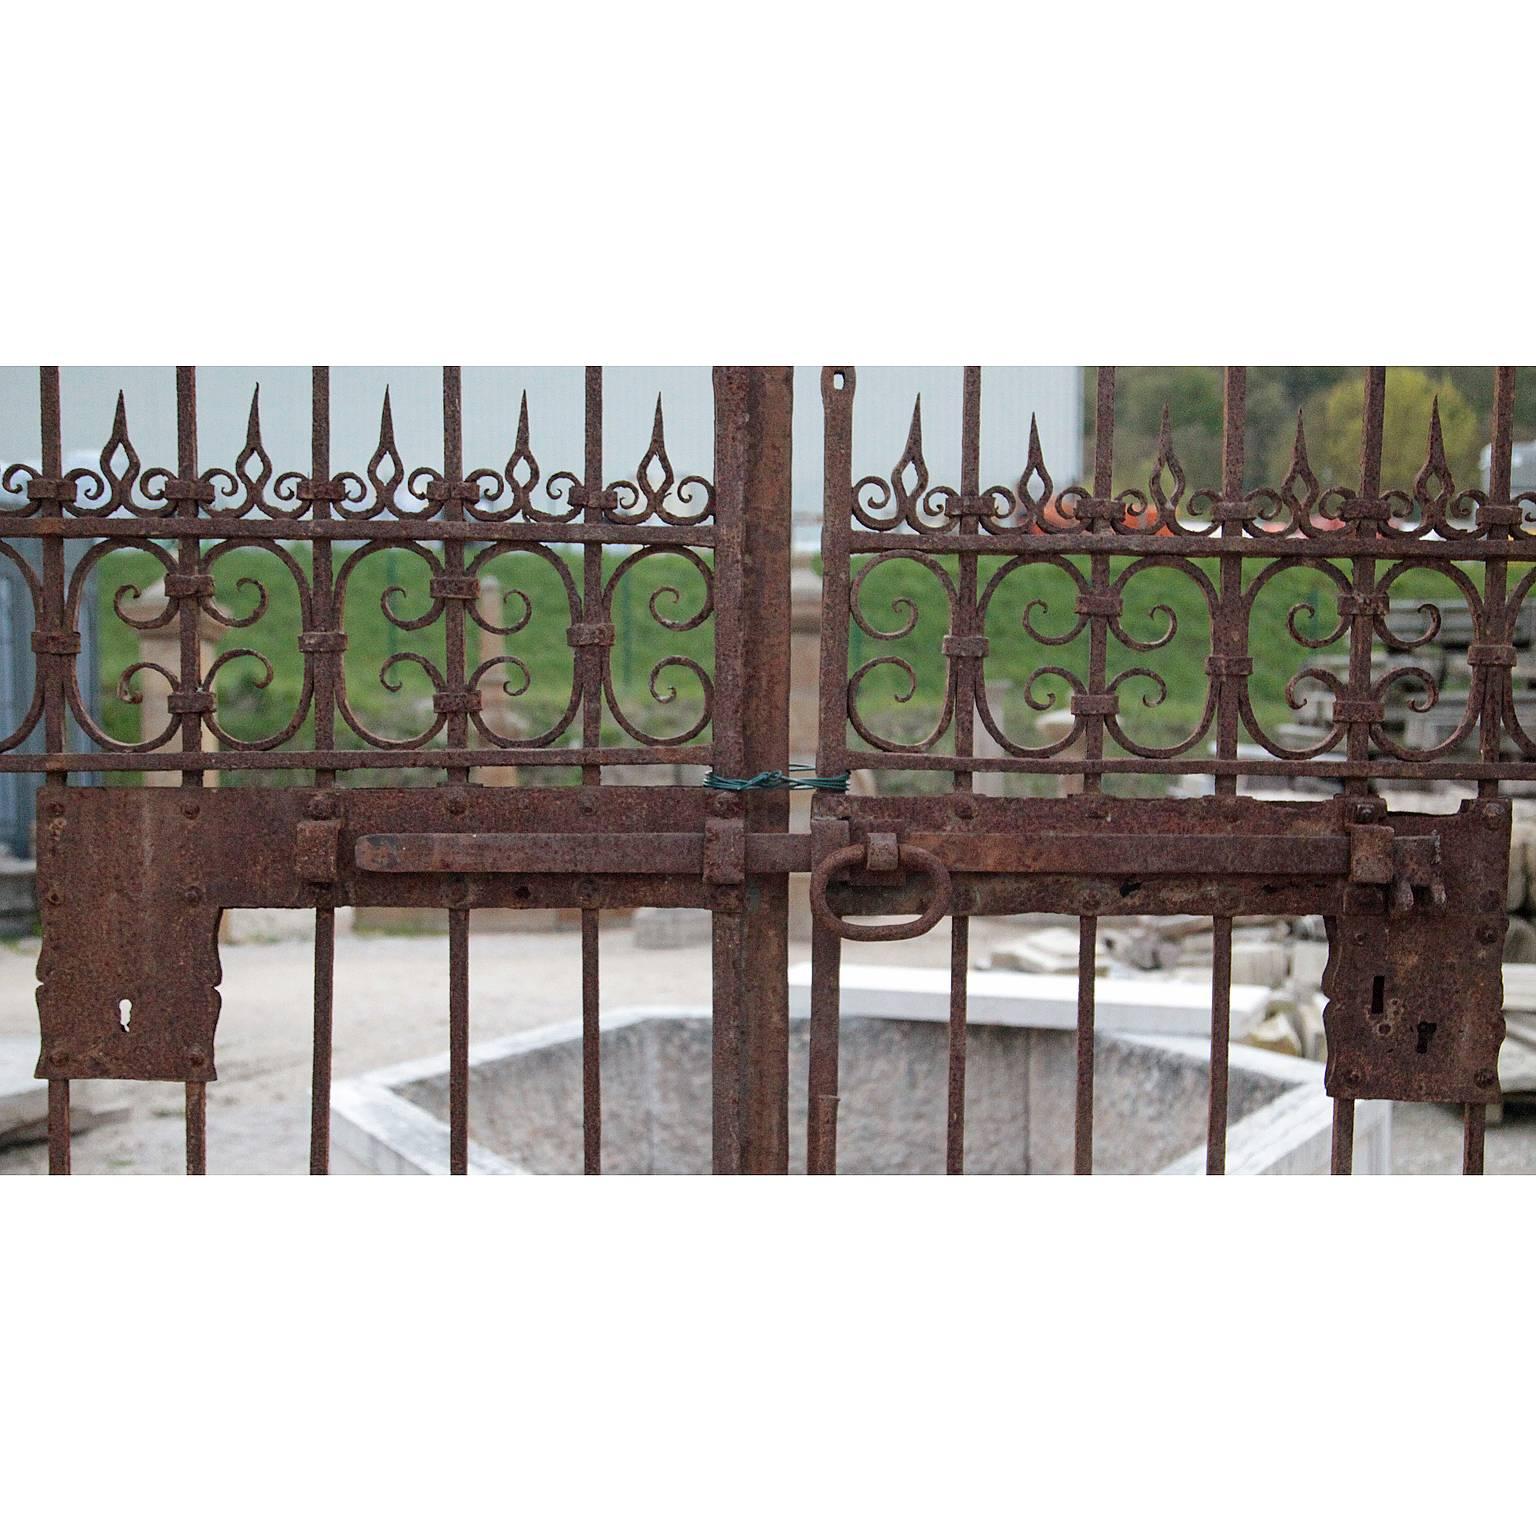 A large iron gate with C- and S-braces as well as flame-shaped elements which sit on top. The gate features two entry ways for people on either side and a large central, two-doored gate for car access.